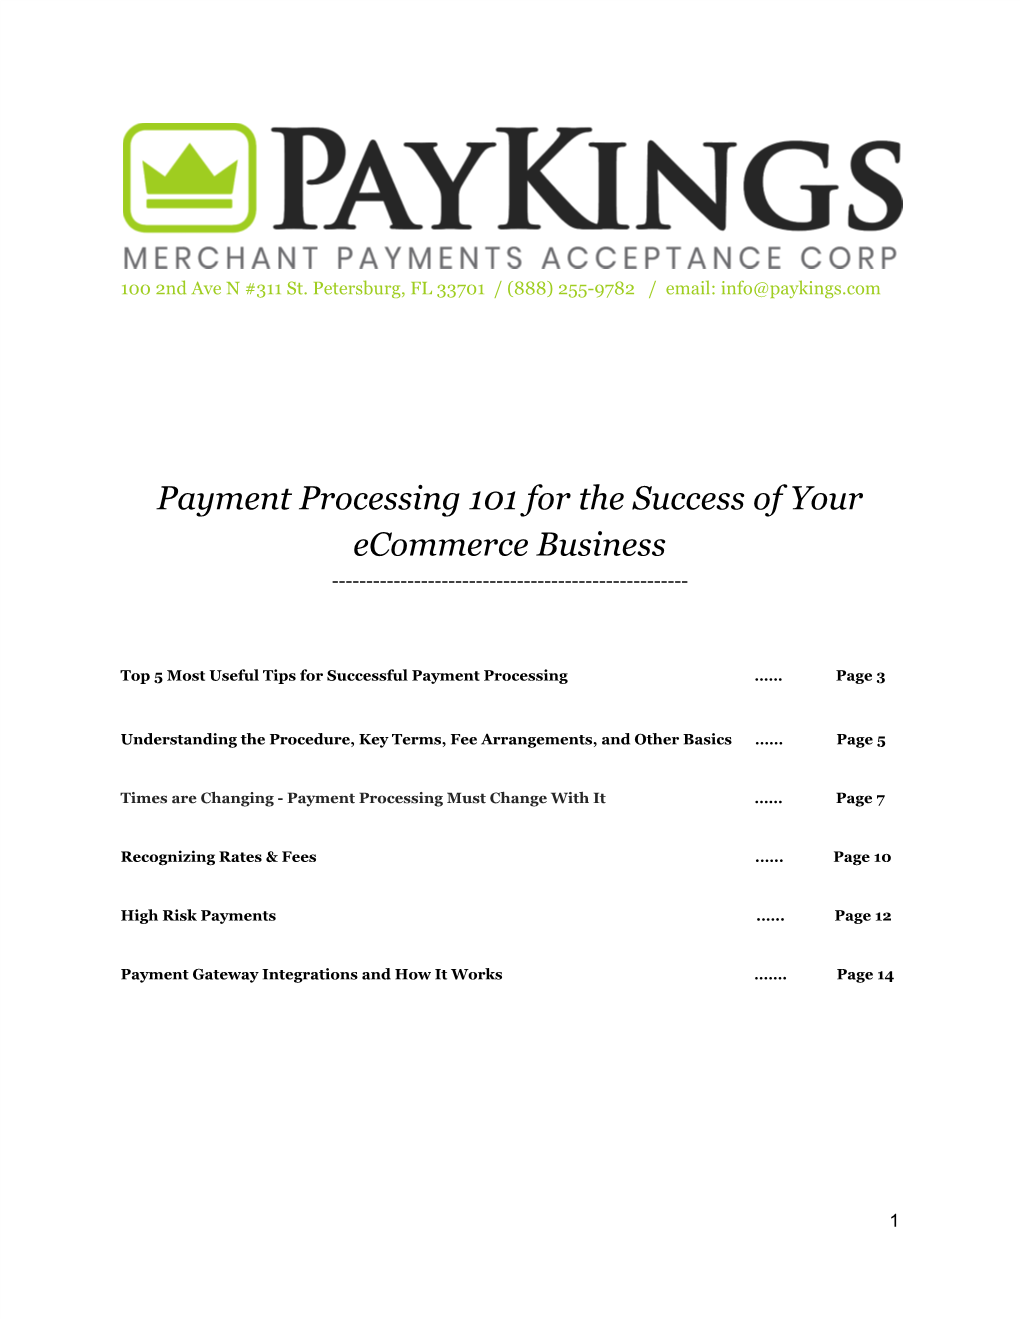 Payment Processing 101 for the Success of Your Ecommerce Business